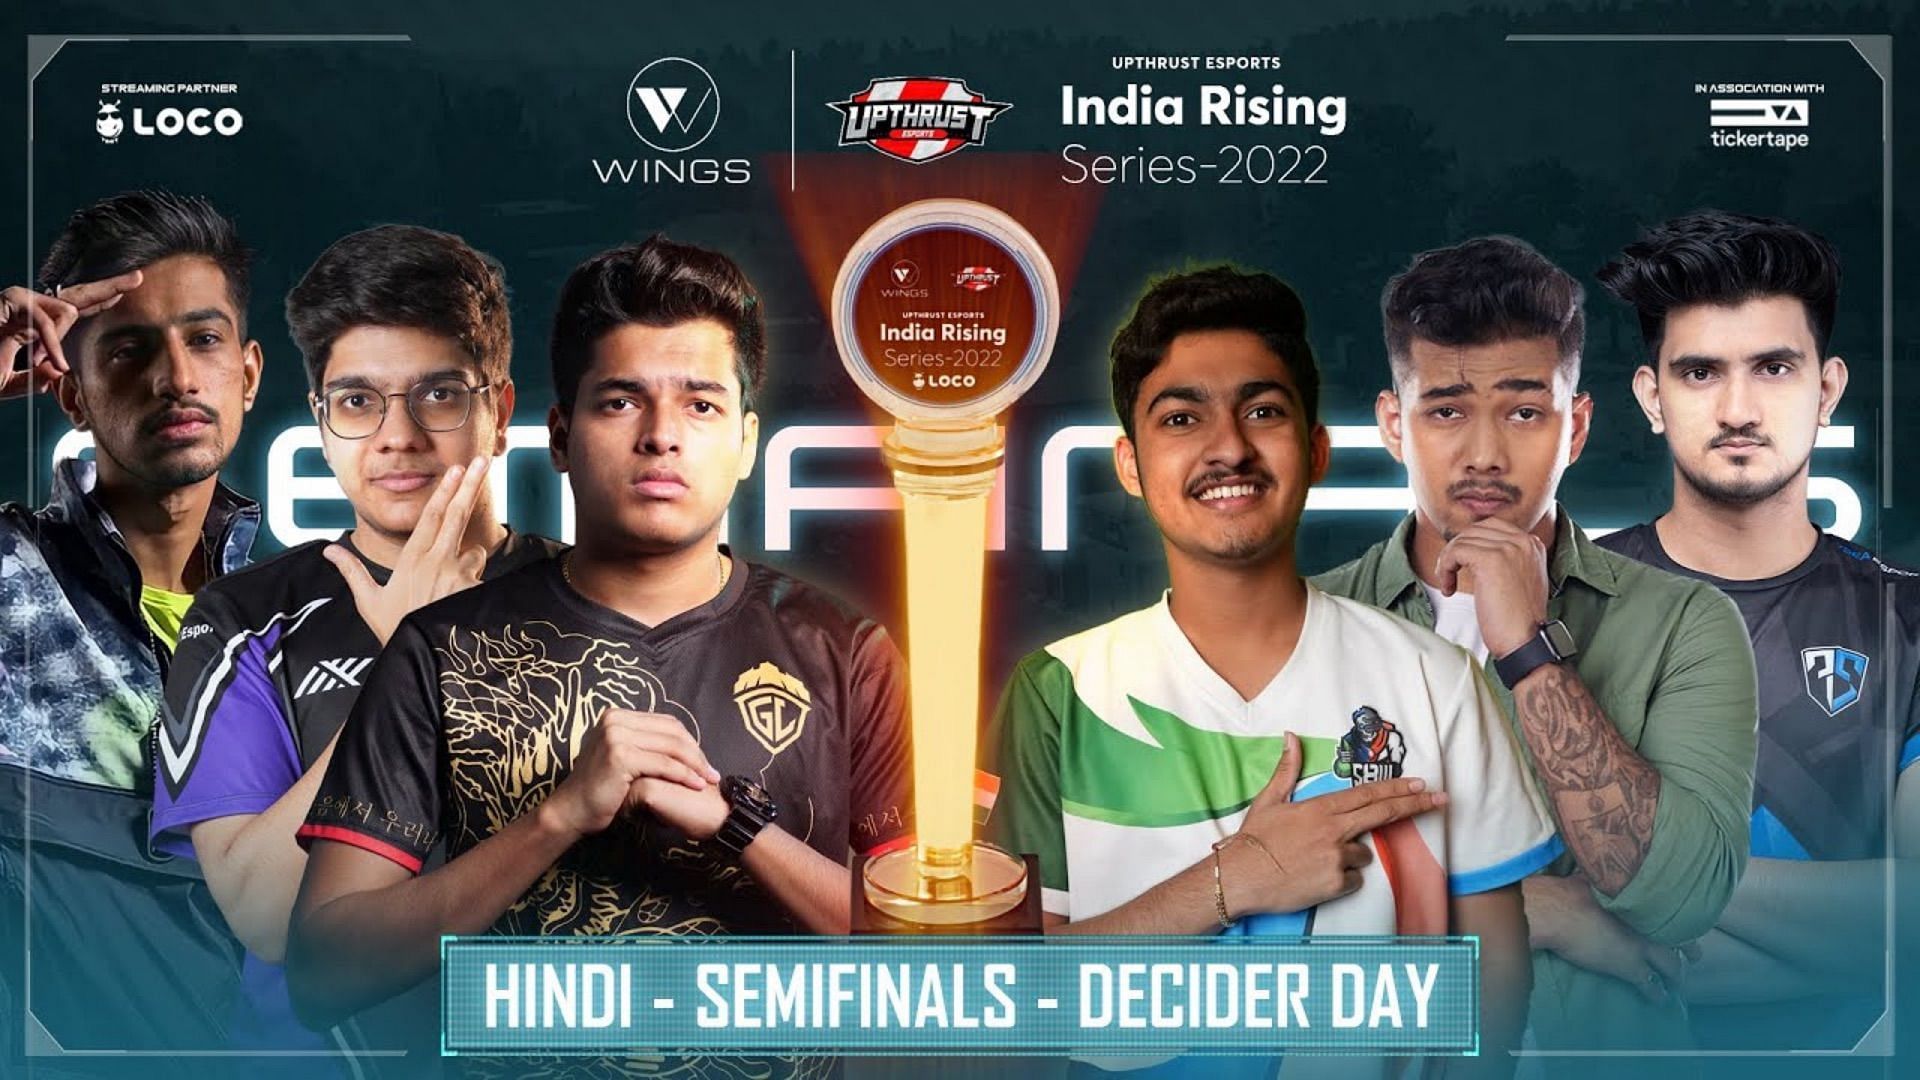 BGMI India Rising features a total prize of INR 15 lakhs (Image via Upthrust Esports)